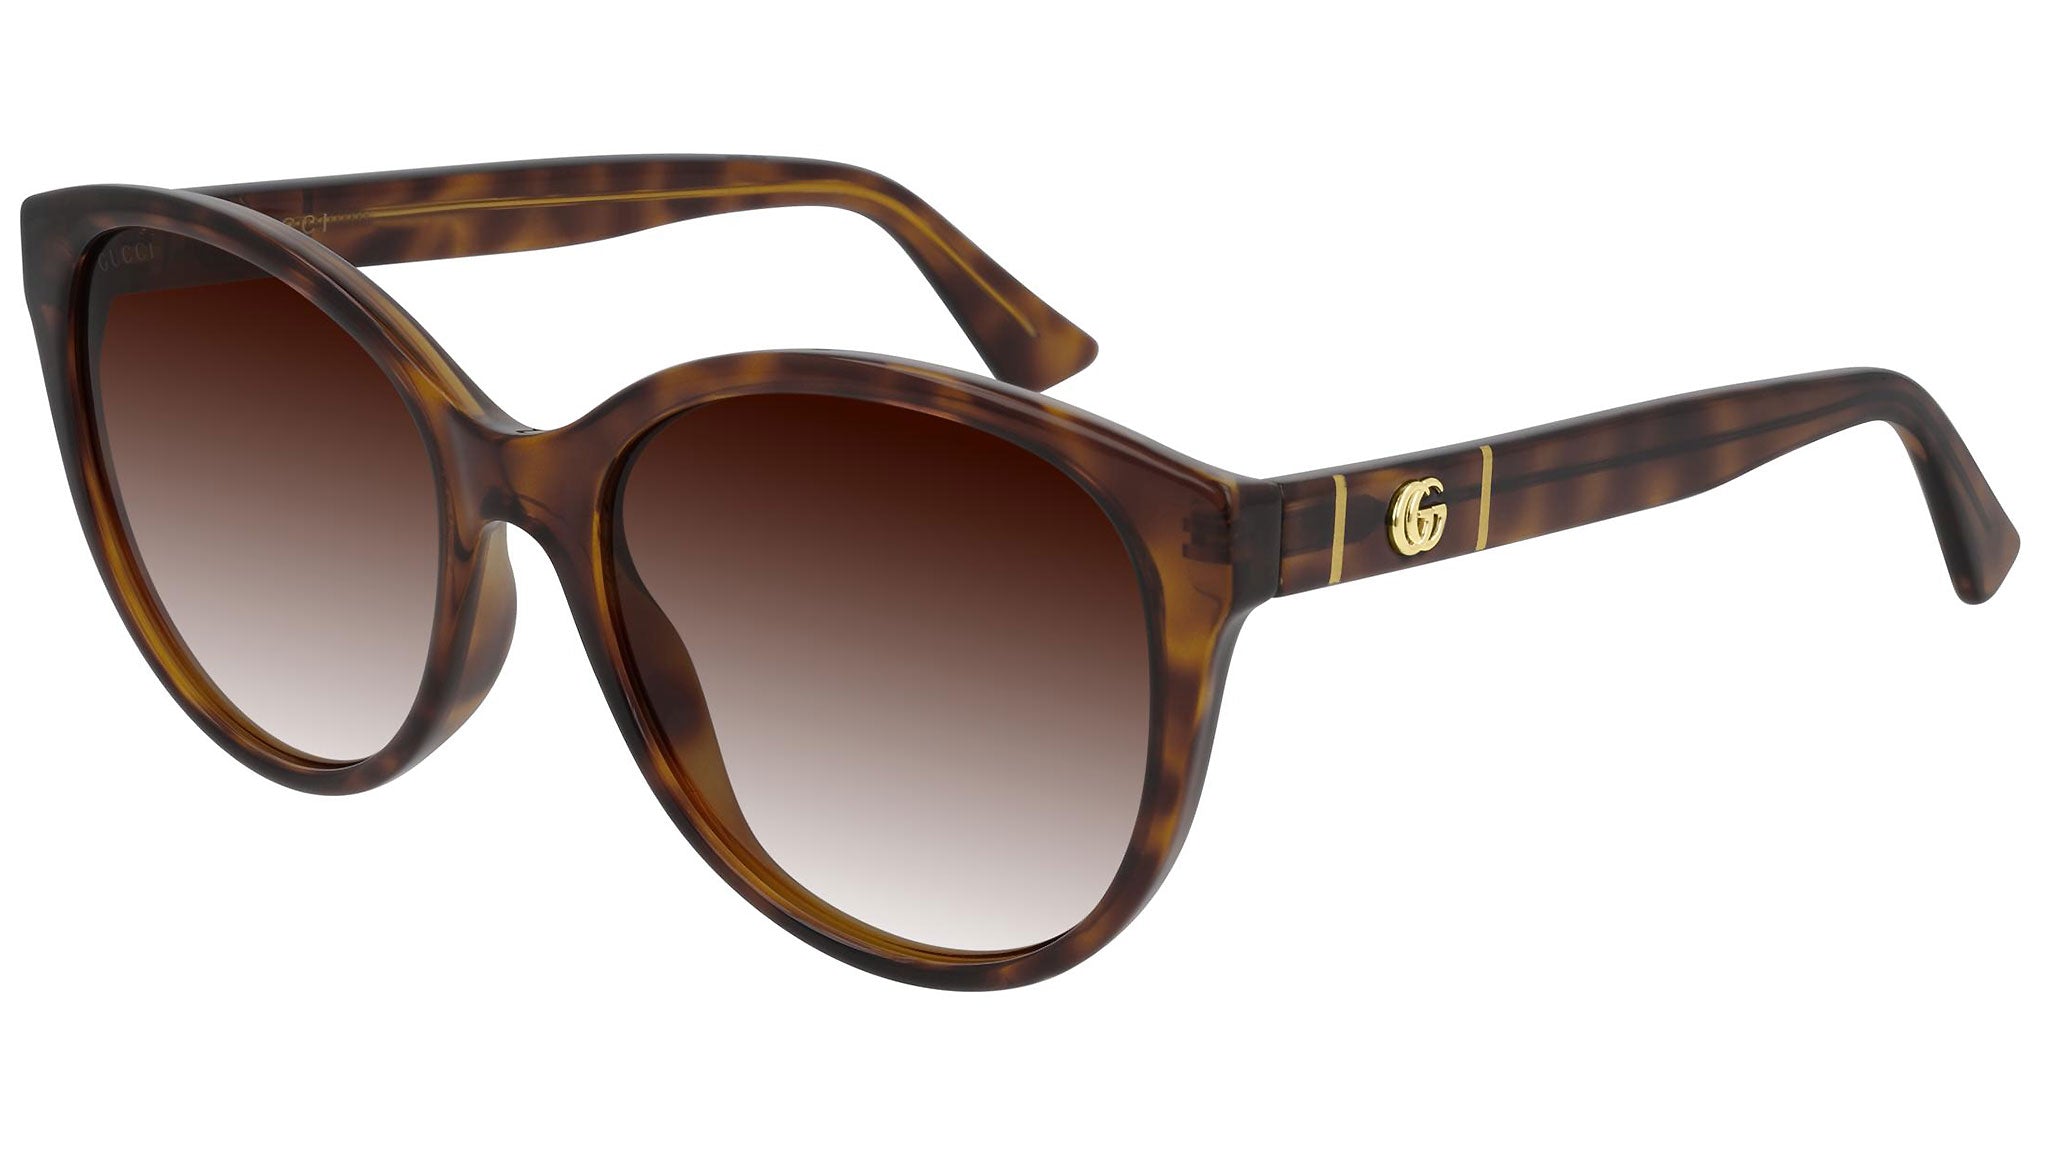 GG0631S shiny tortoise and brown